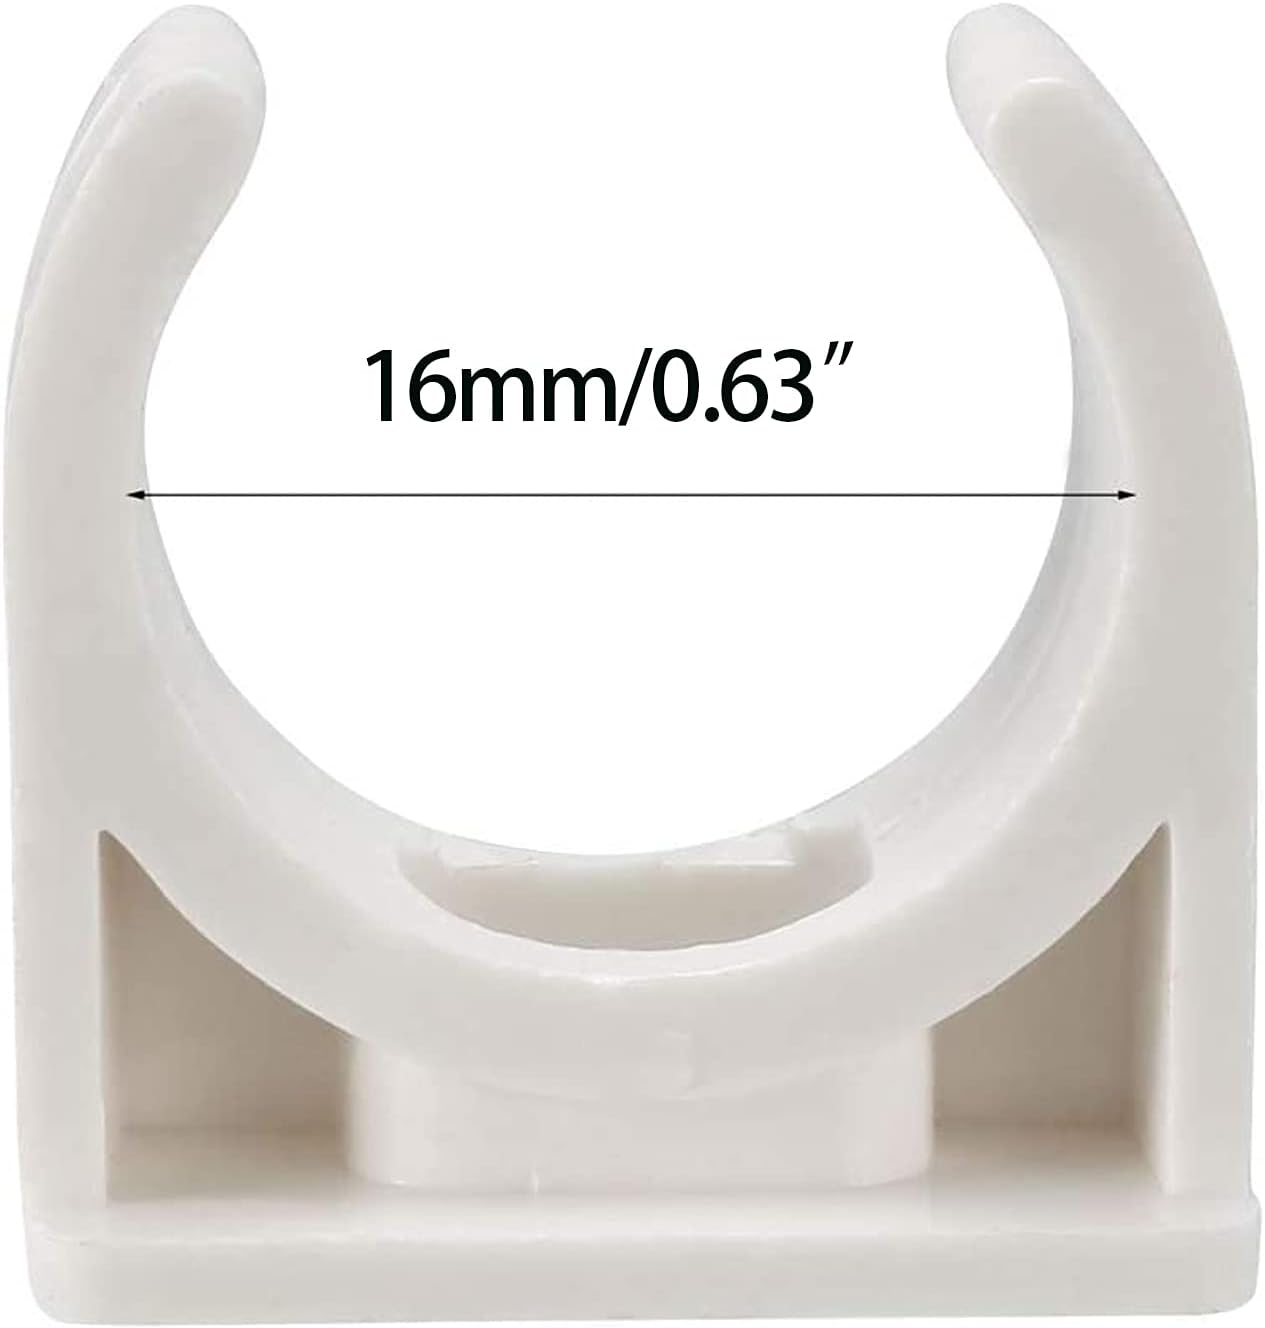 30 pcs u shaped pvc water 32mm pipe clamps clips u shaped buckles fit for 1 14 32mm water pipes and tv trays tubing hose 3